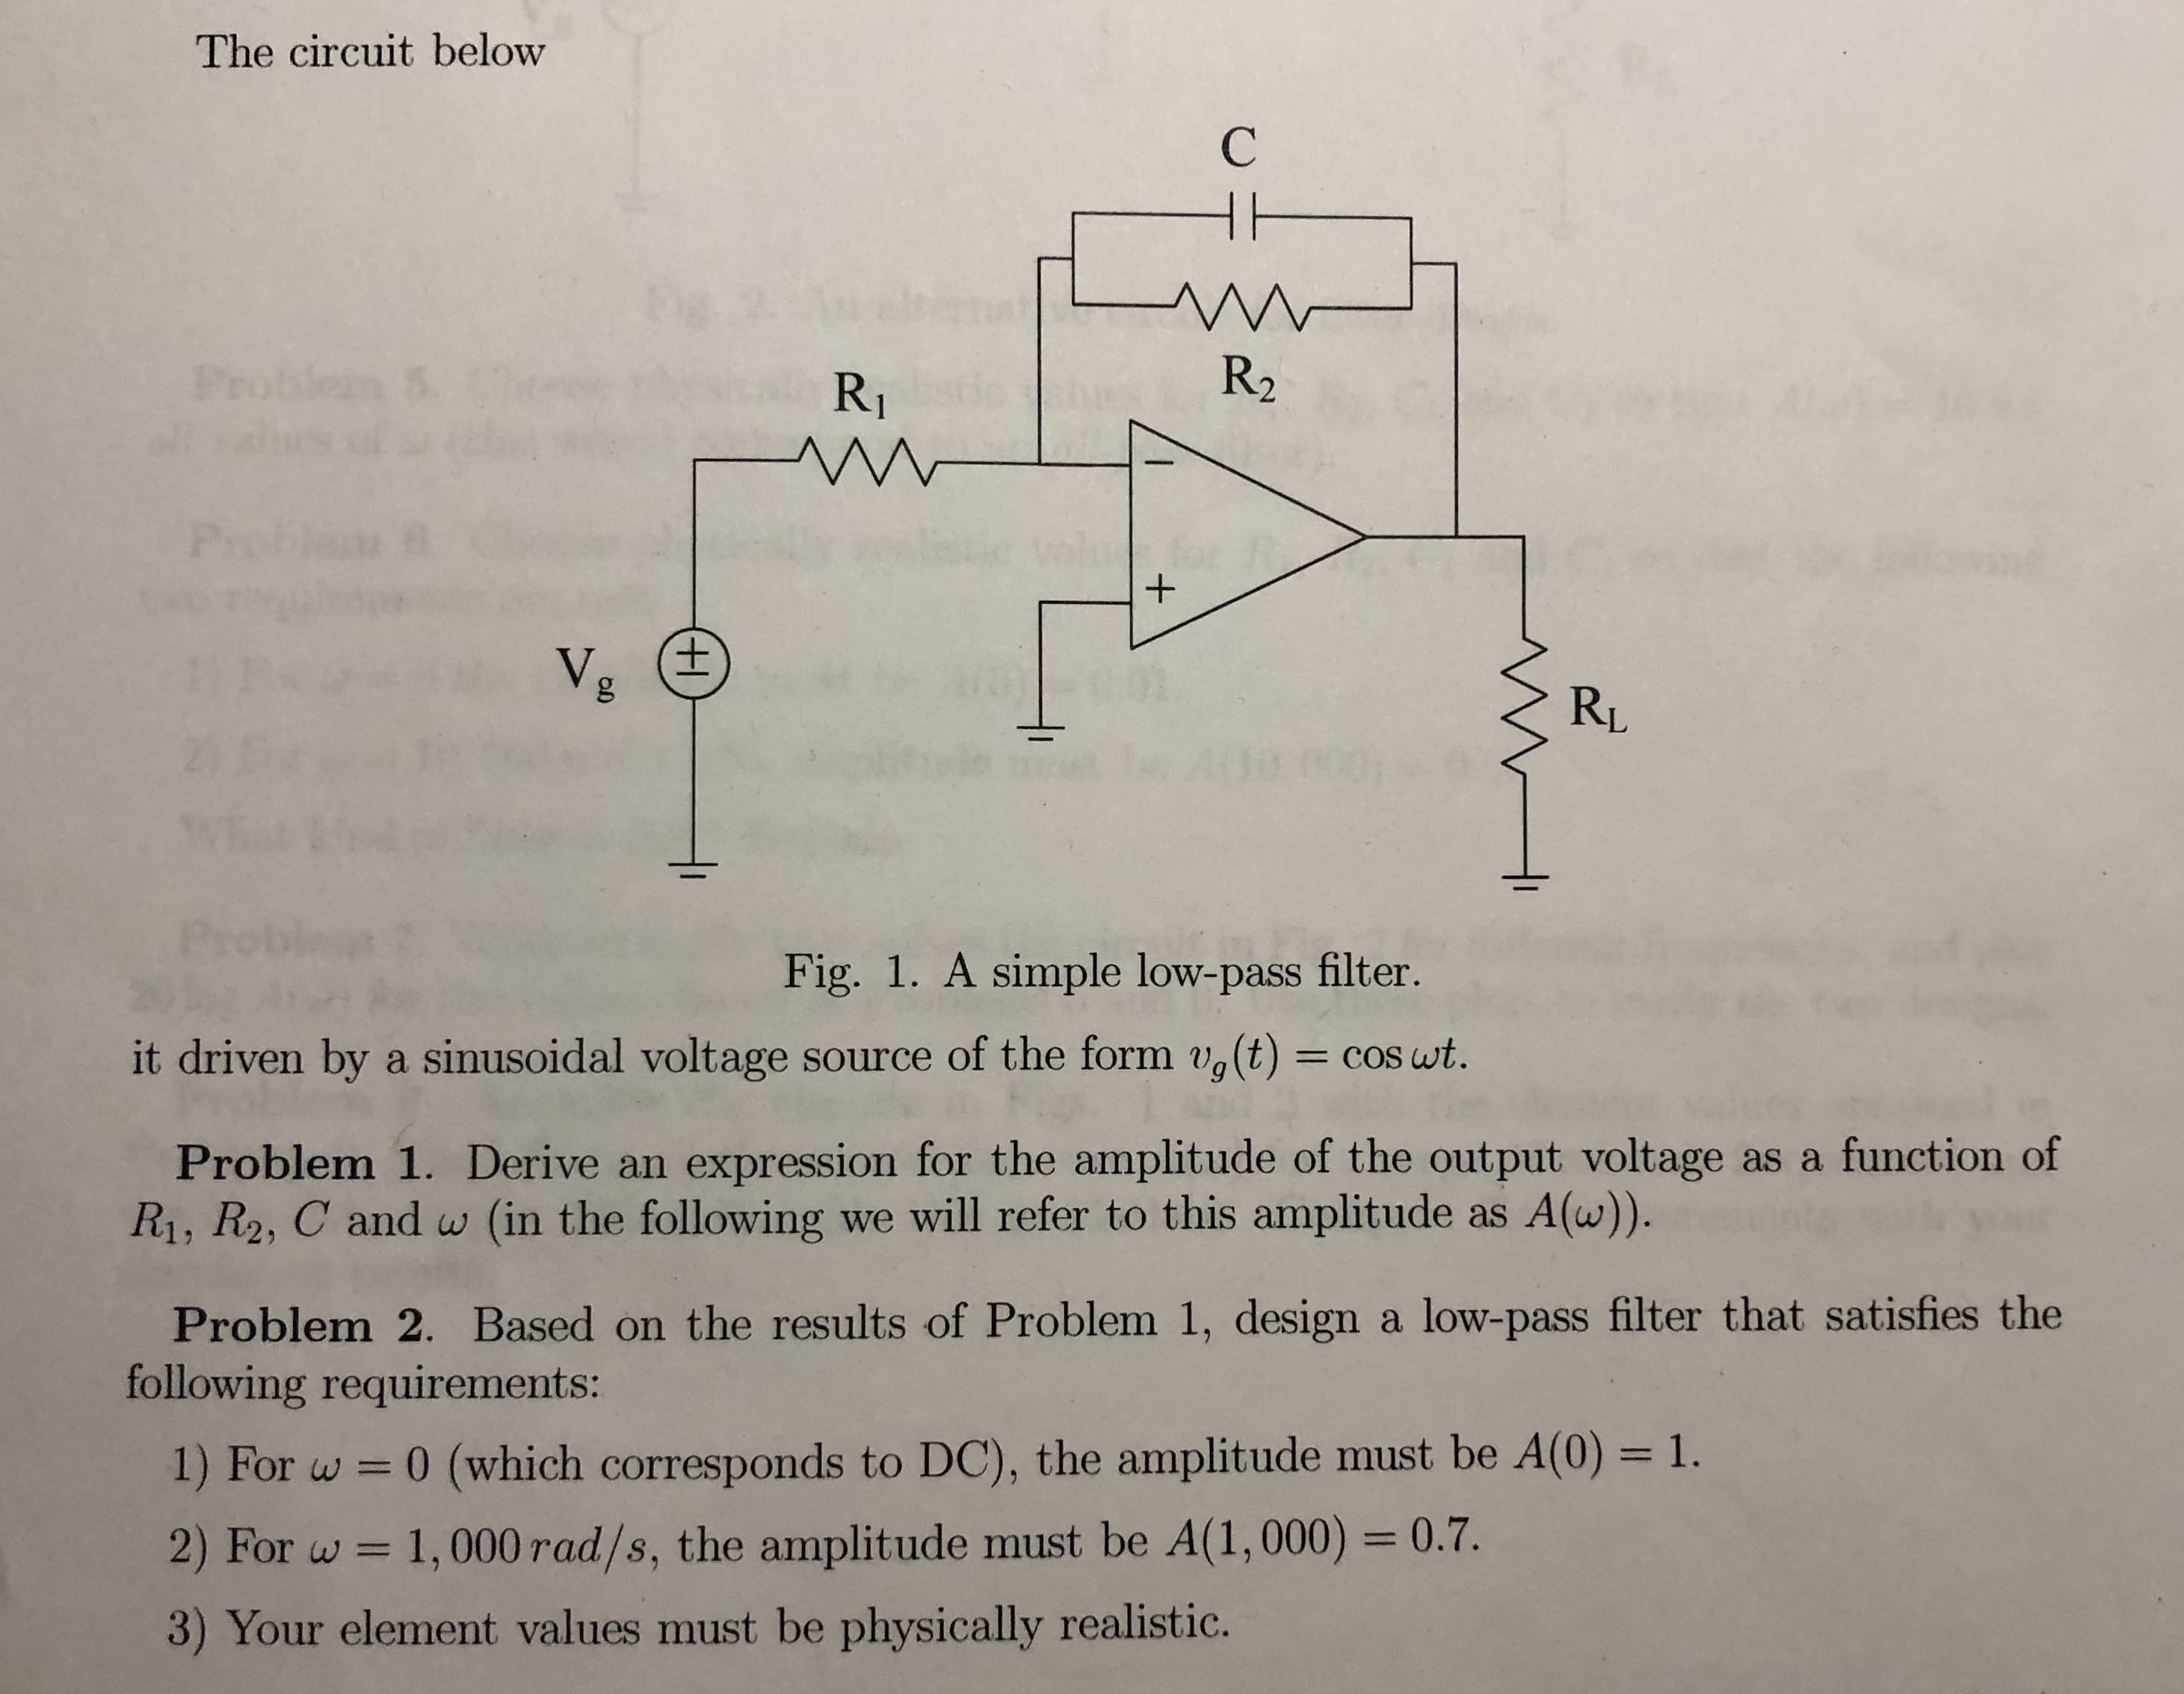 The circuit below
R2
RI
RL
Fig. 1. A simple low-pass filter.
it driven by a sinusoidal voltage source of the form ug(t) = cos at
Problem 1. Derive an expression for the amplitude of the output voltage as a function of
Ri, R2, C and w (in the following we will refer to this amplitude as A(w)).
Problem 2. Based on the results of Problem 1, design a low-pass filter that satisfies the
following requirements:
1) For w
0 (which corresponds to DC), the amplitude must be A(0) -1.
2) For w 1,000rad/s, the amplitude must be A(1,000) 0.7.
3) Your element values must be physically realistio.
